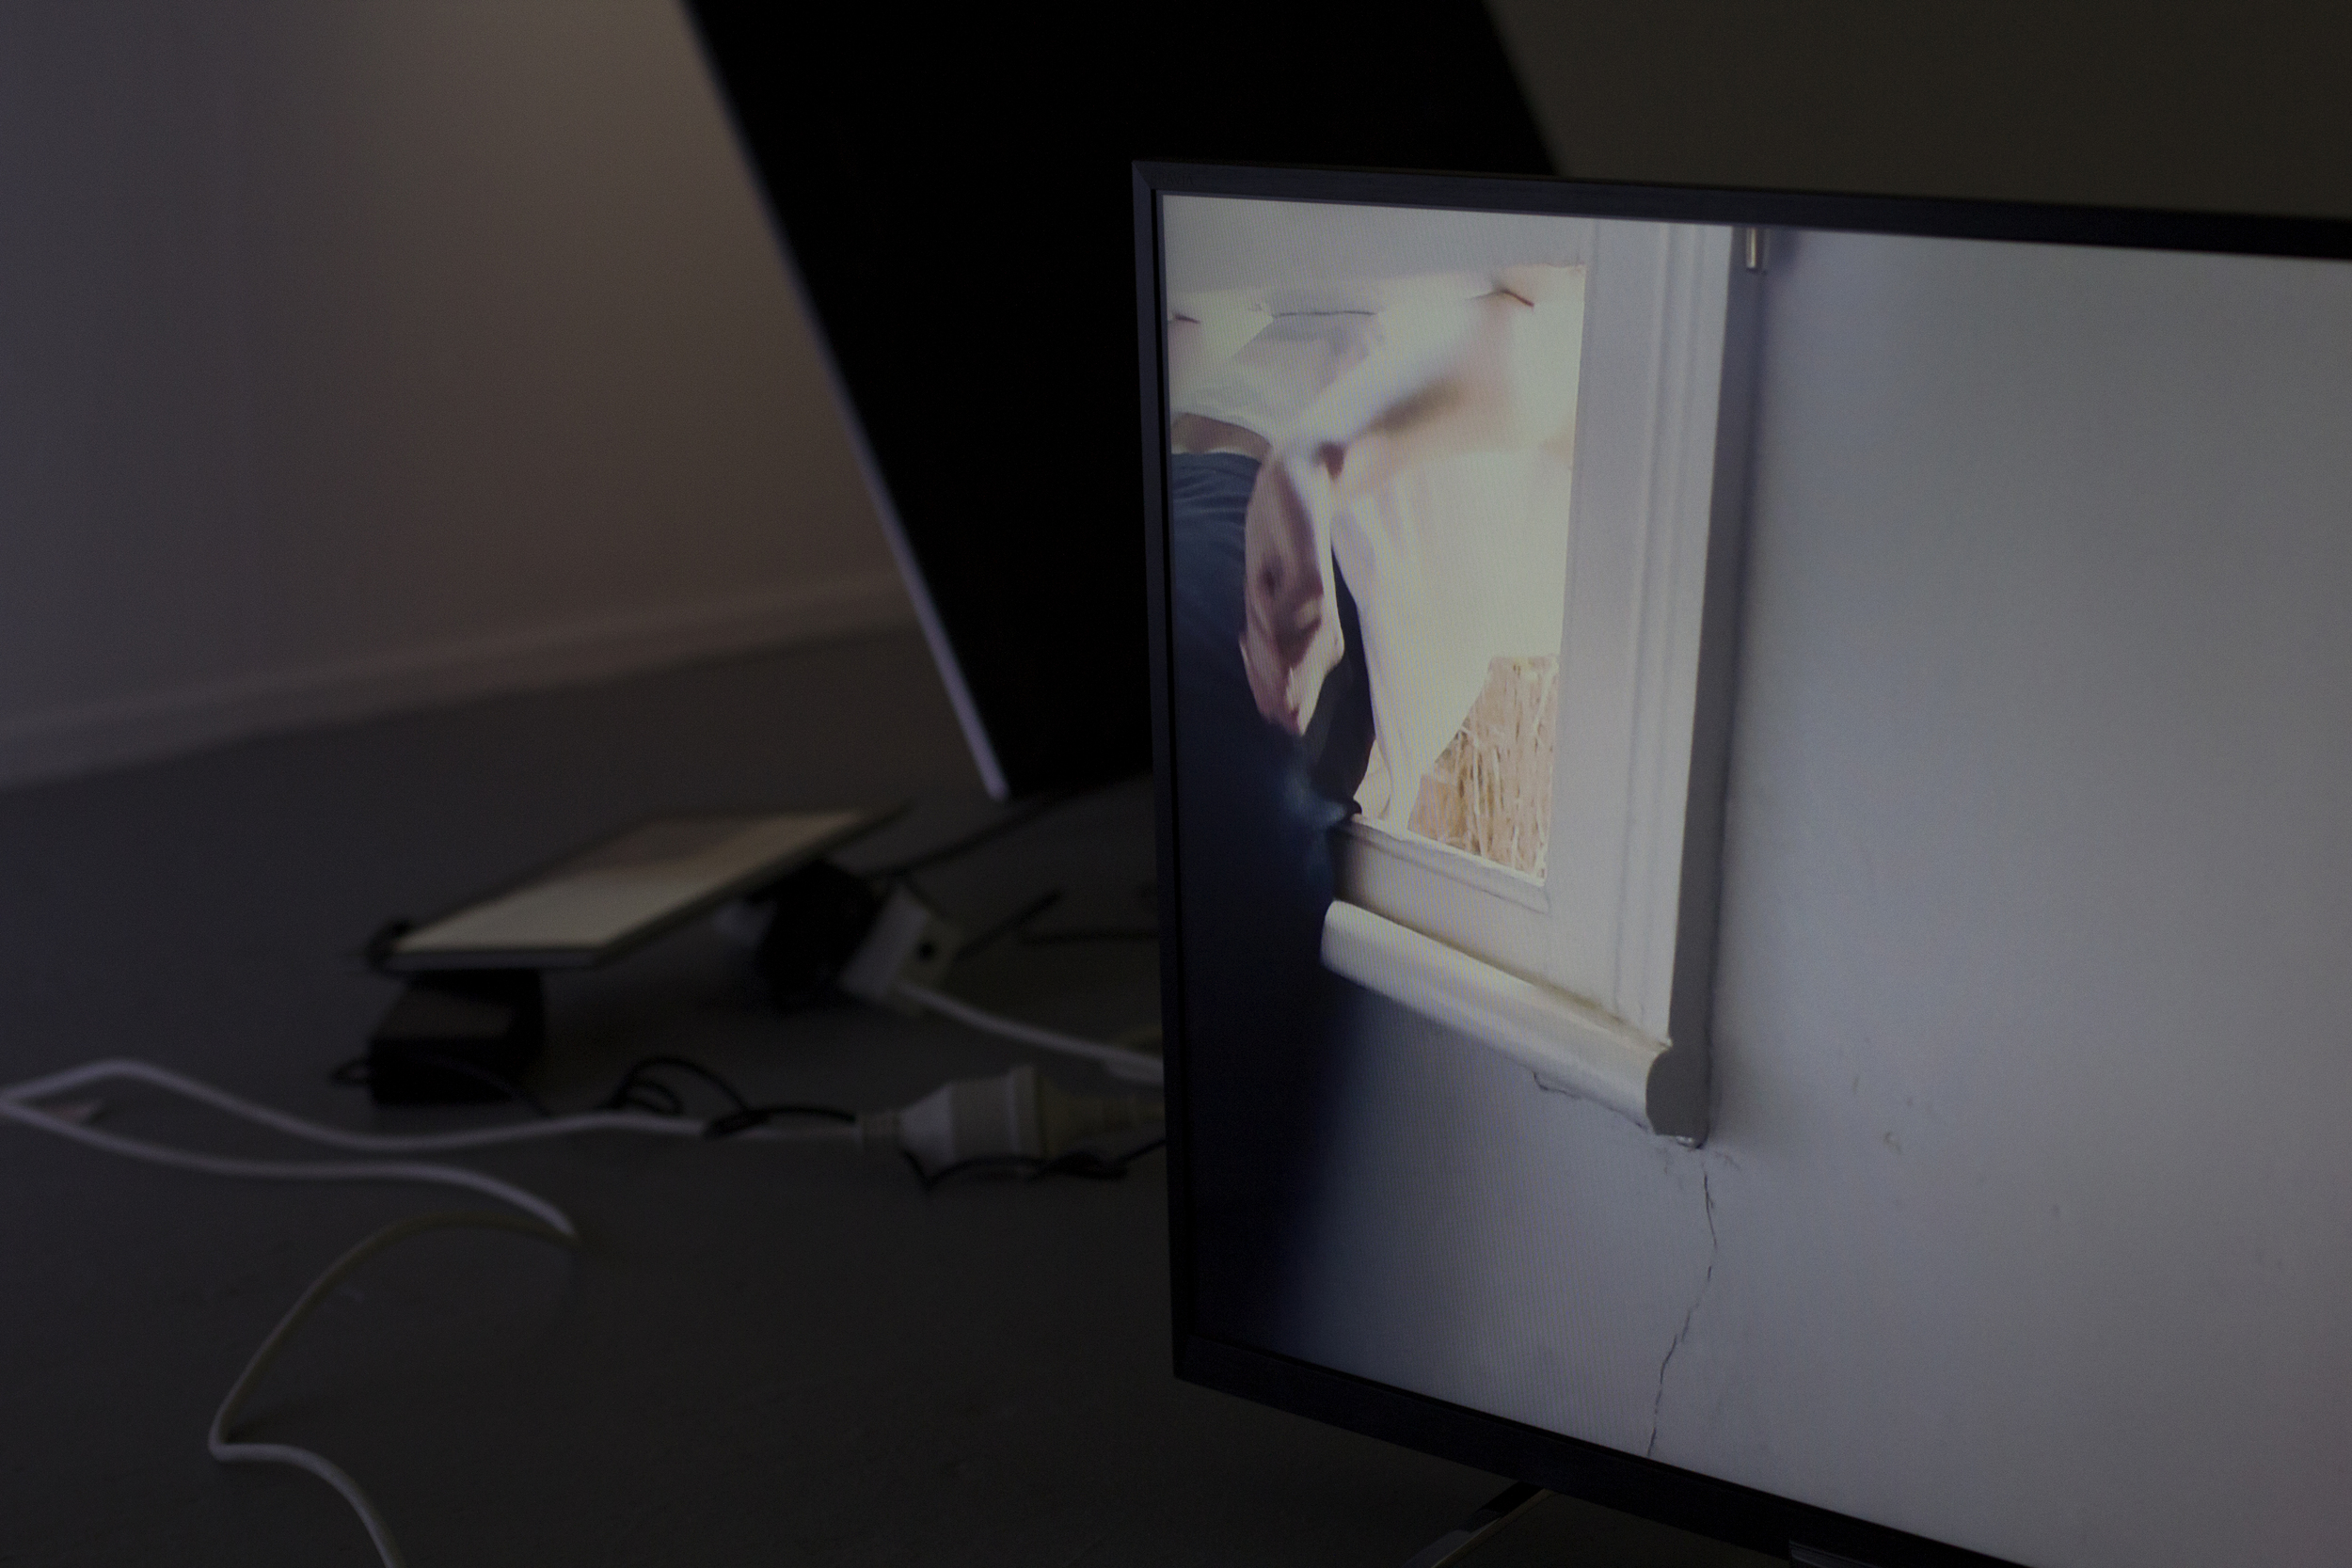    Suspended,  &nbsp;2015, 5 channel video installation, dimensions variable 